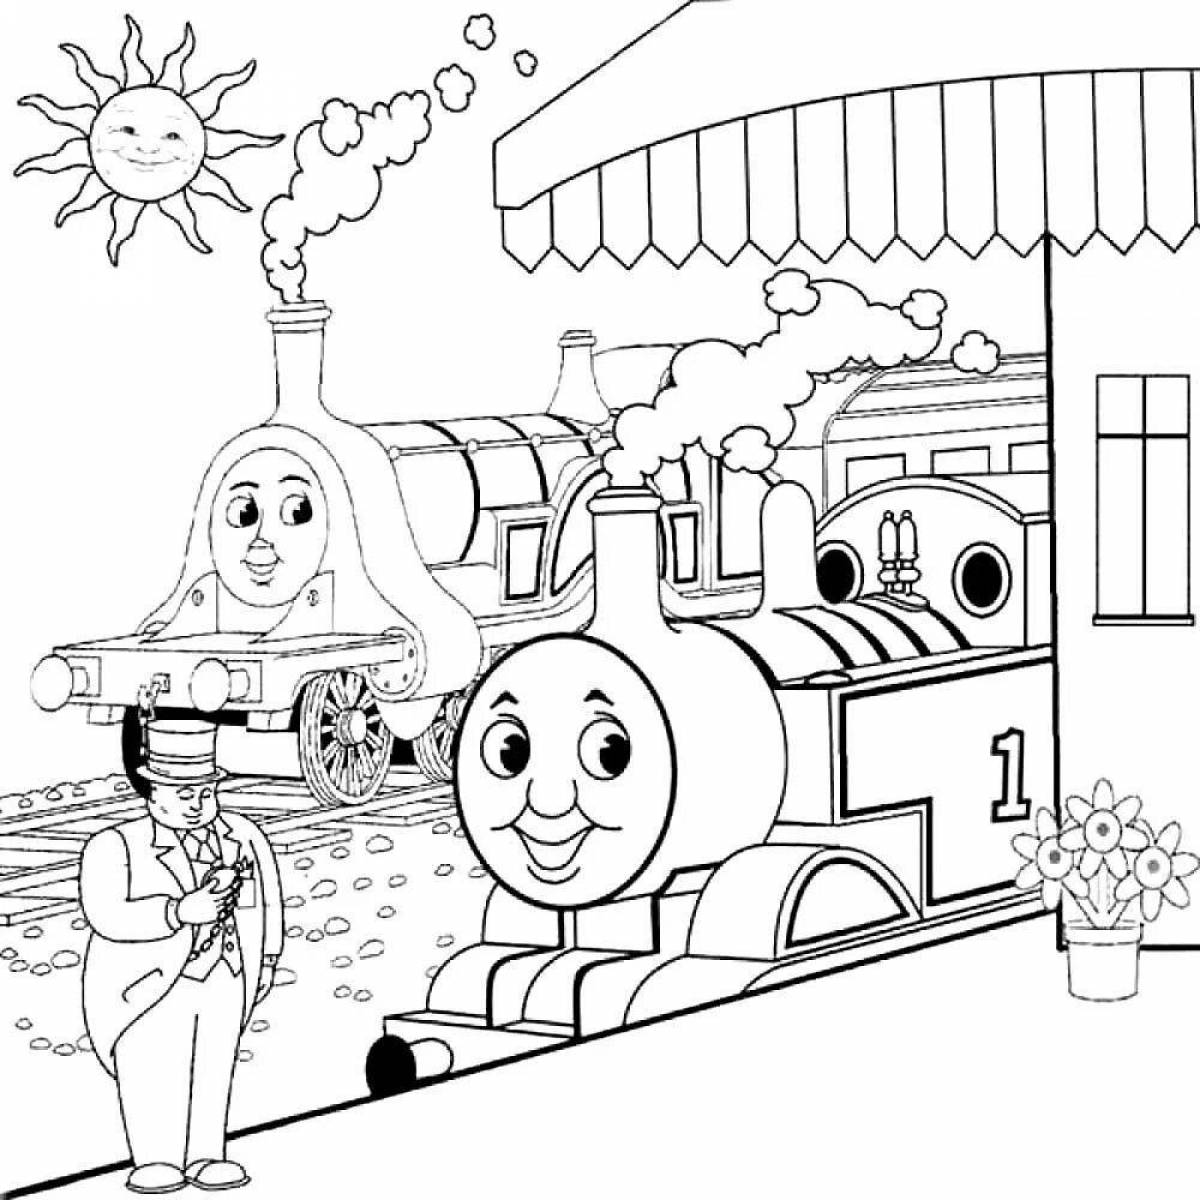 Thomas' funny coloring book for kids